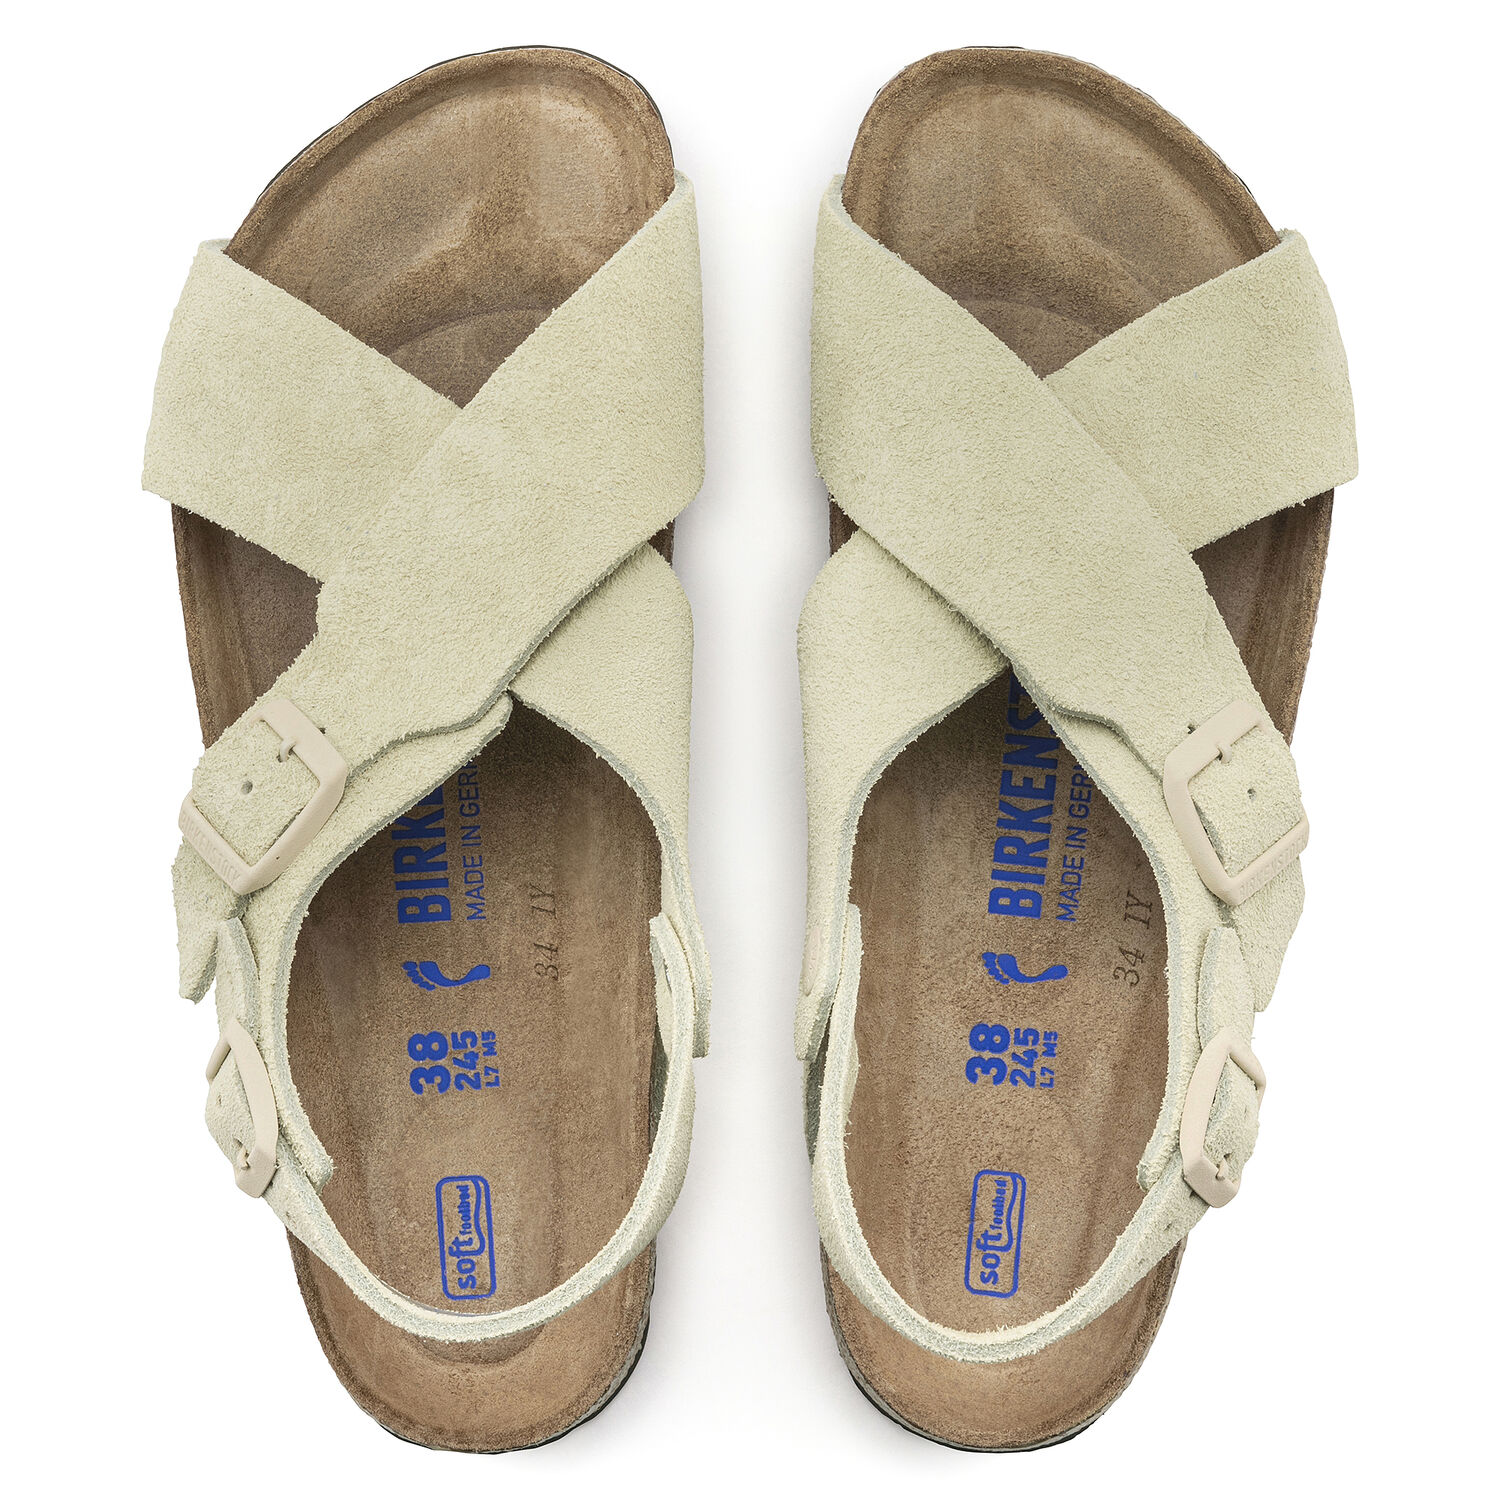 Tulum Soft Footbed Almond - Suede Leather